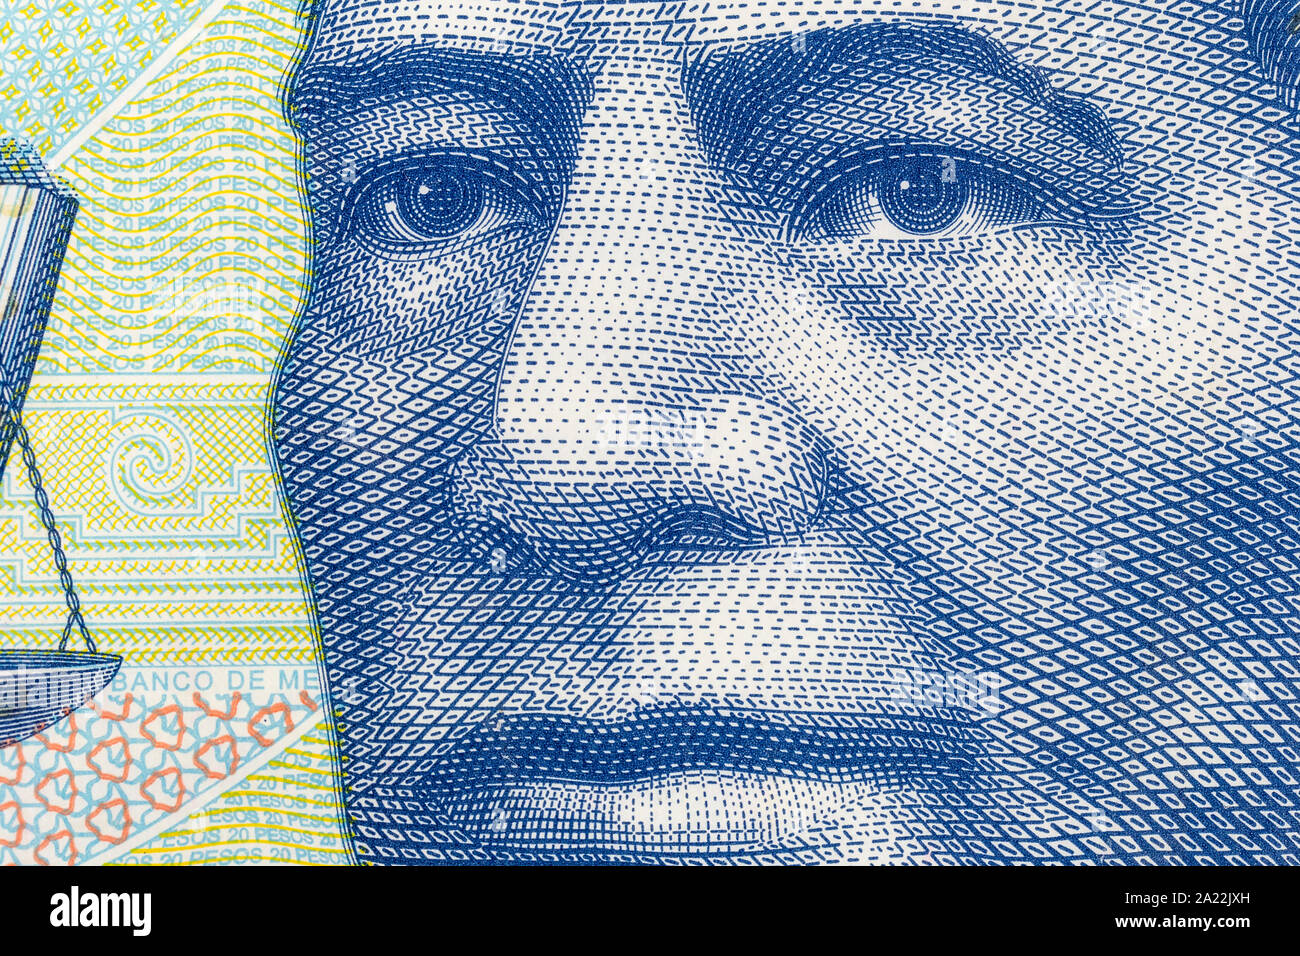 Macro close up photo of Benito Juarez on the Mexican 20 Peso currency note. Stock Photo